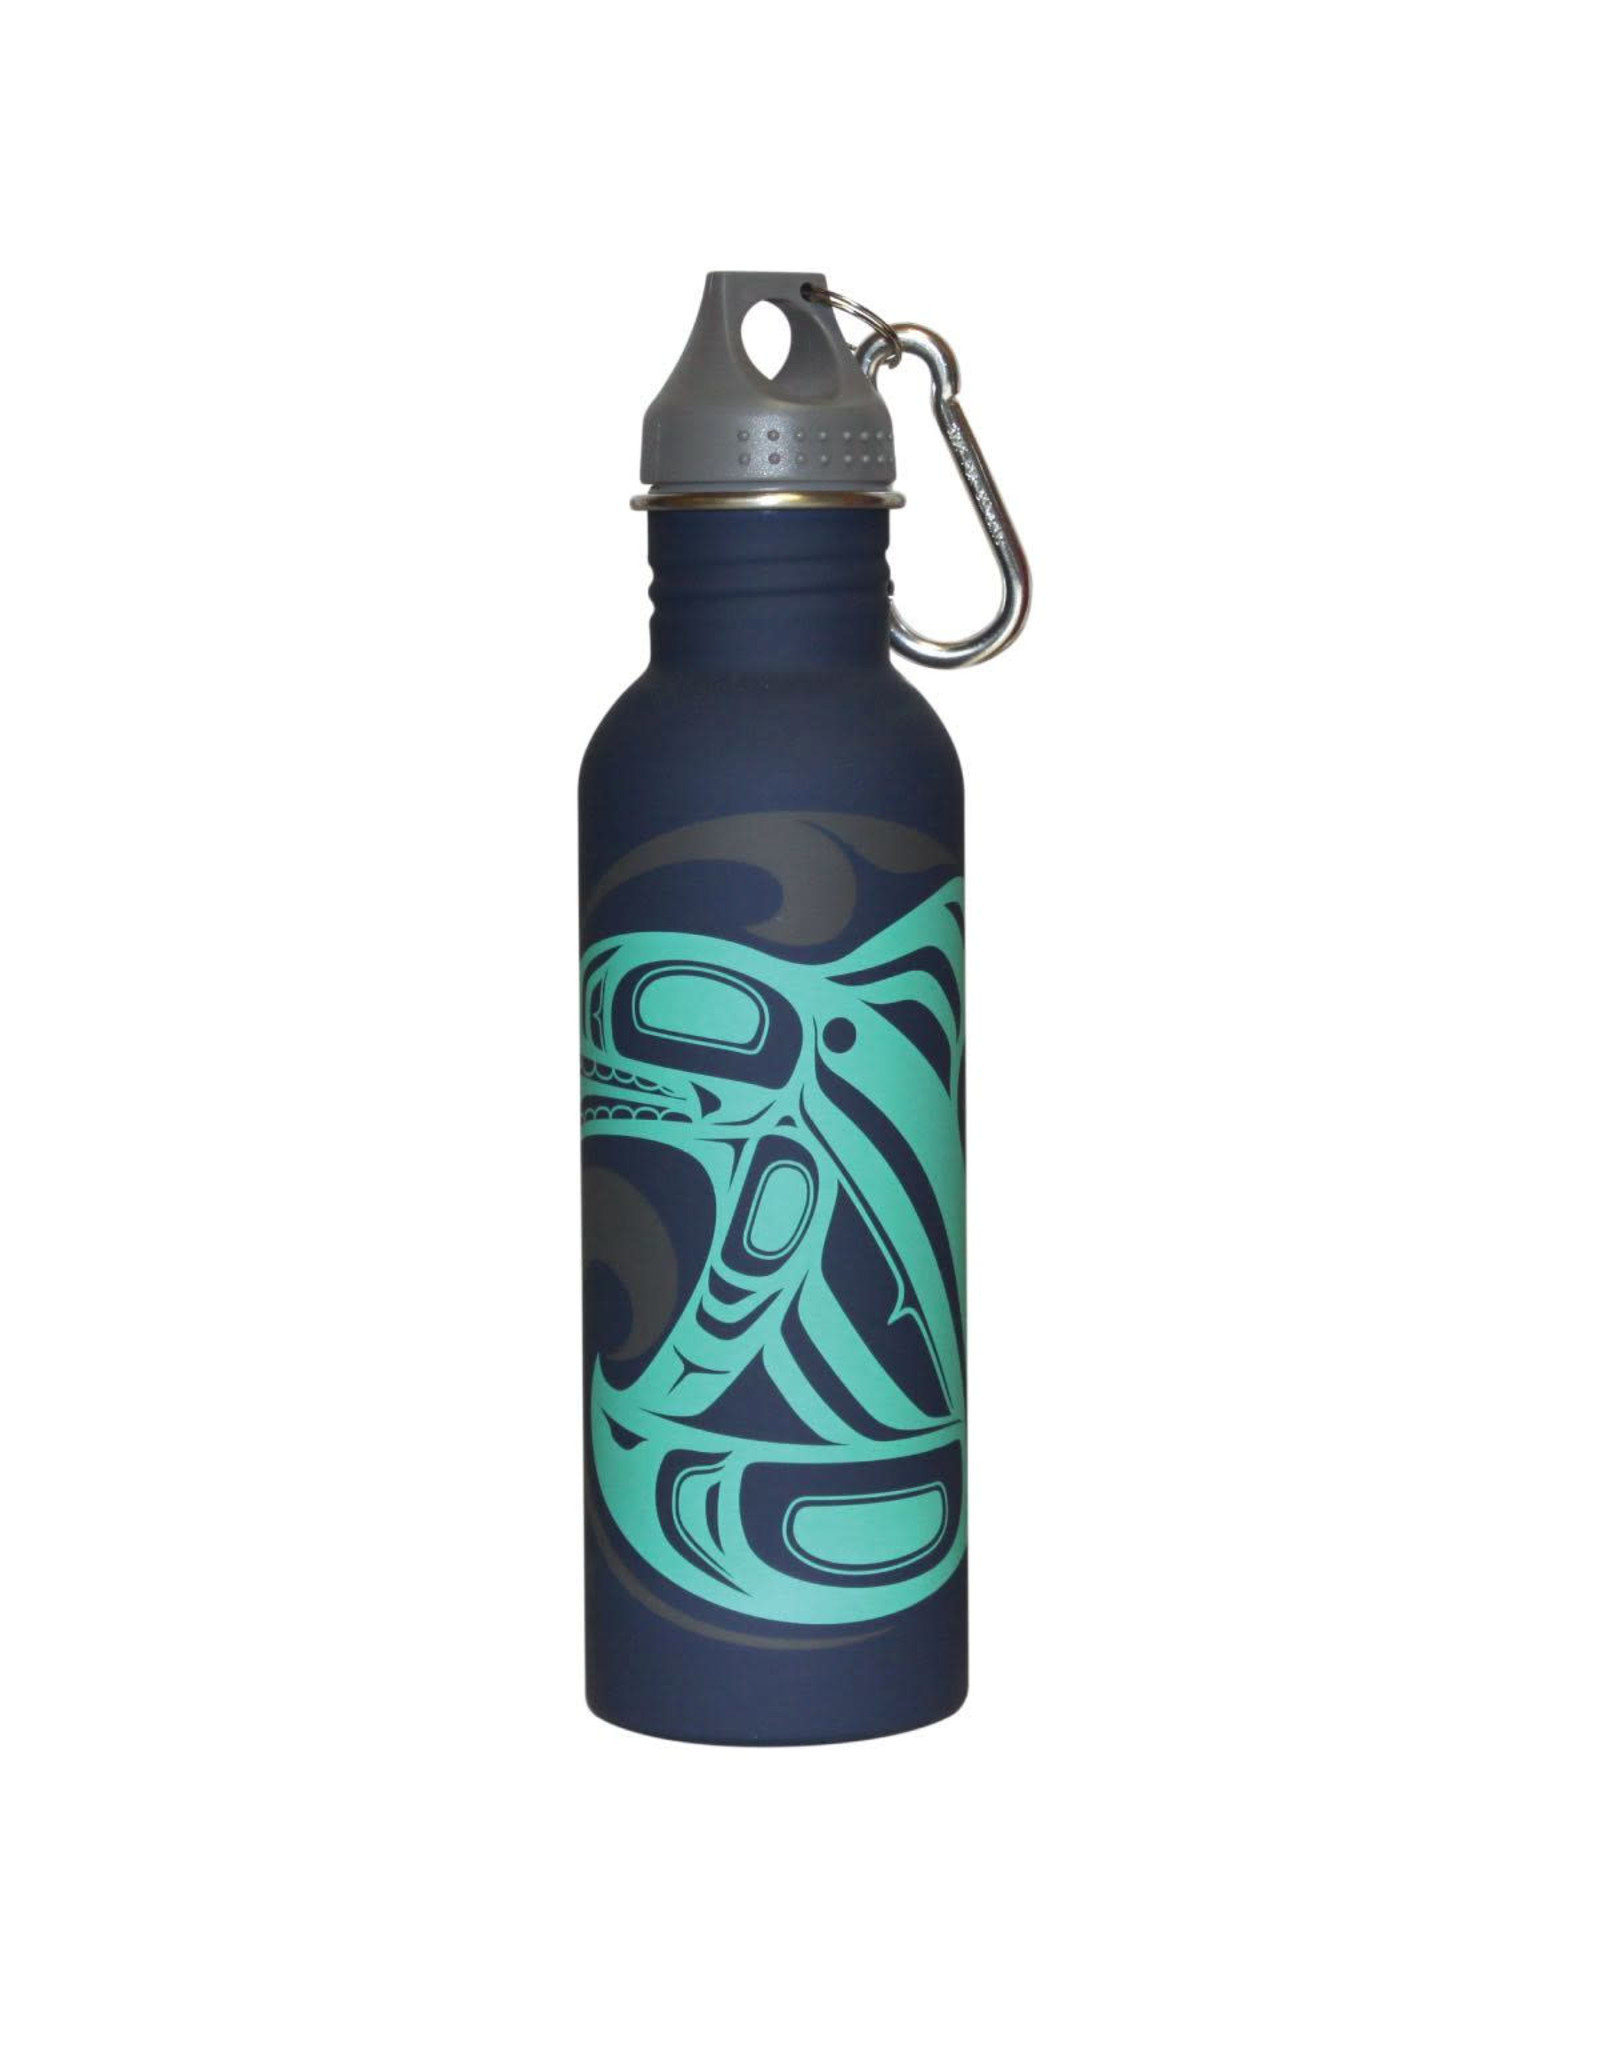 Water Bottle Killer Whale by Trevor Angus - WBS23